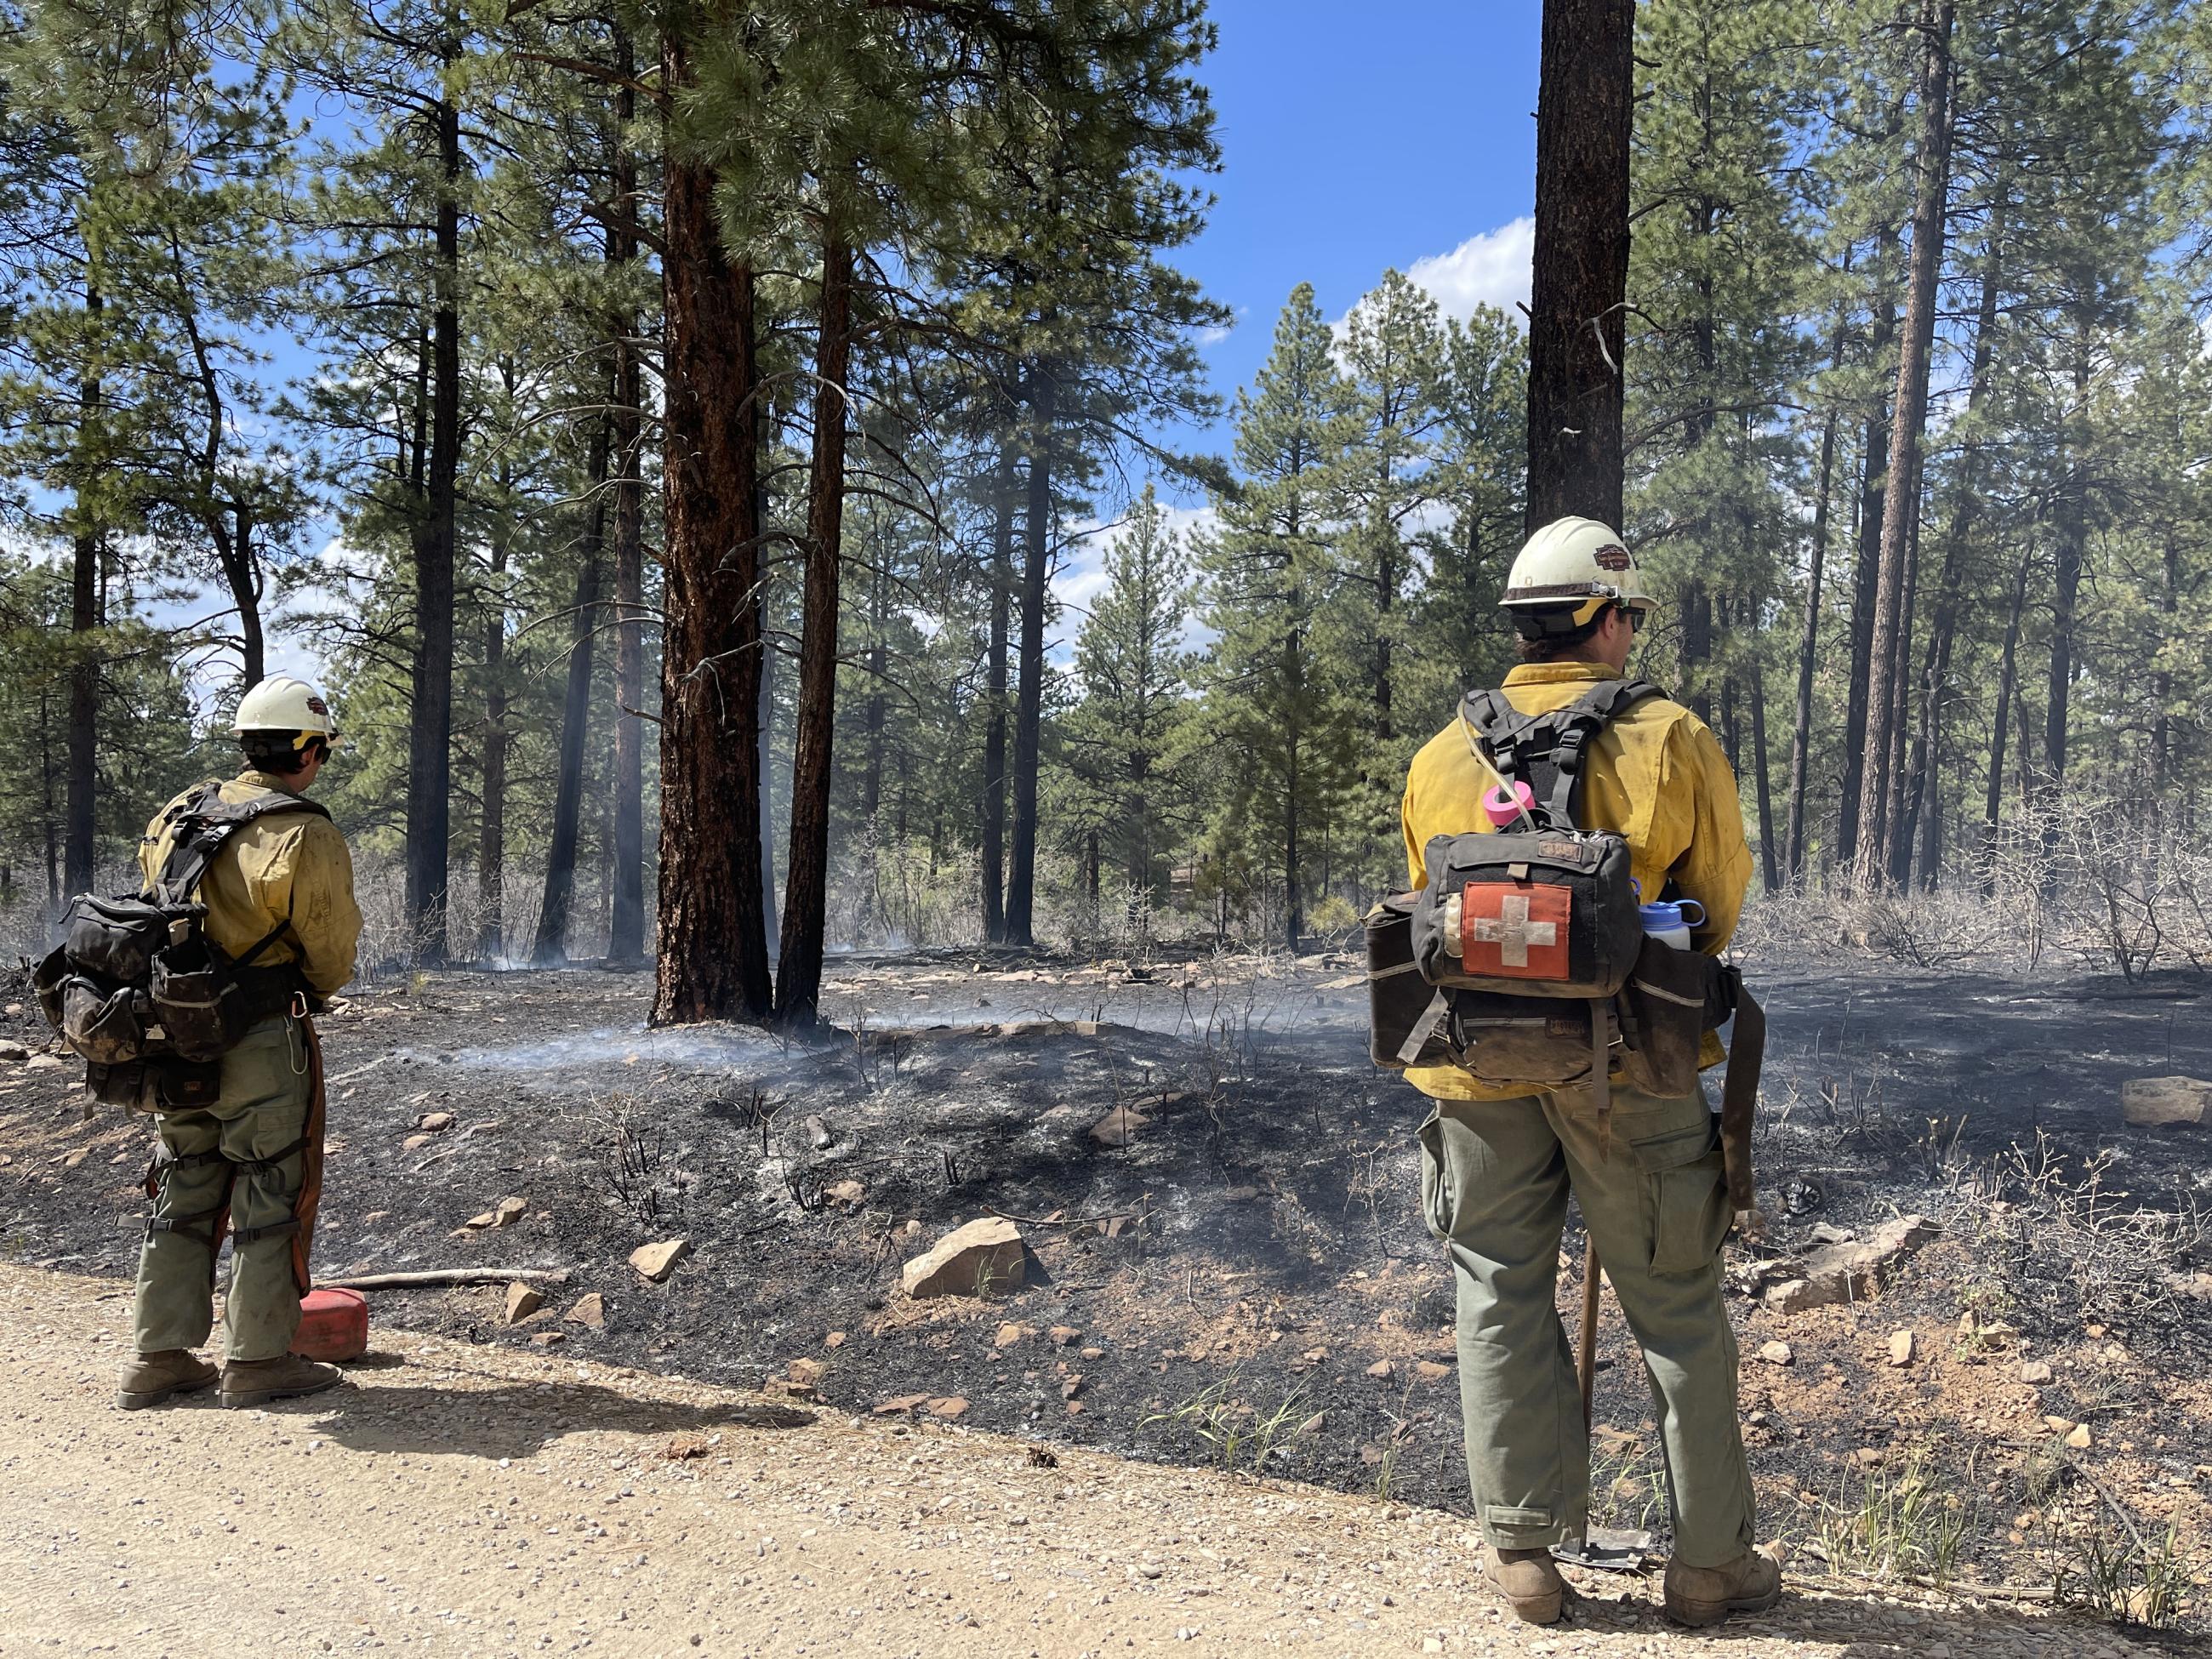 Two firefighters stand on a fireline and watch the fire area to make sure no fire escapes